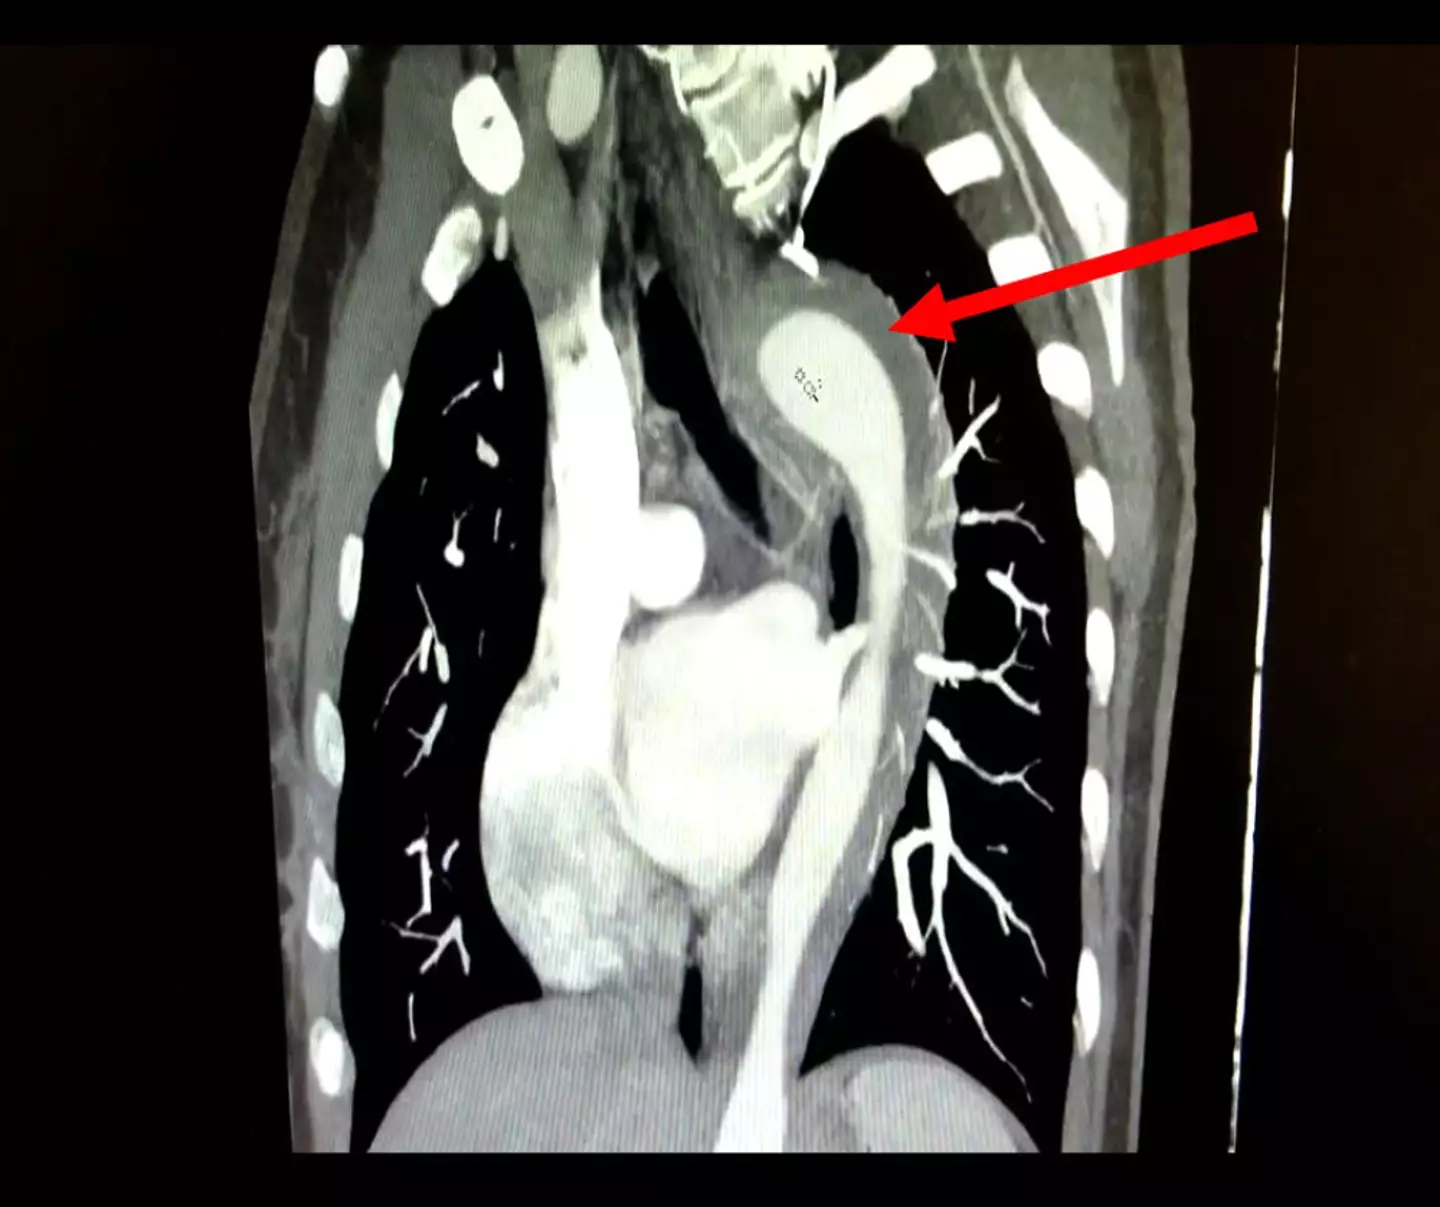 This scan of the chest shows how the leaking aorta has affected the body.